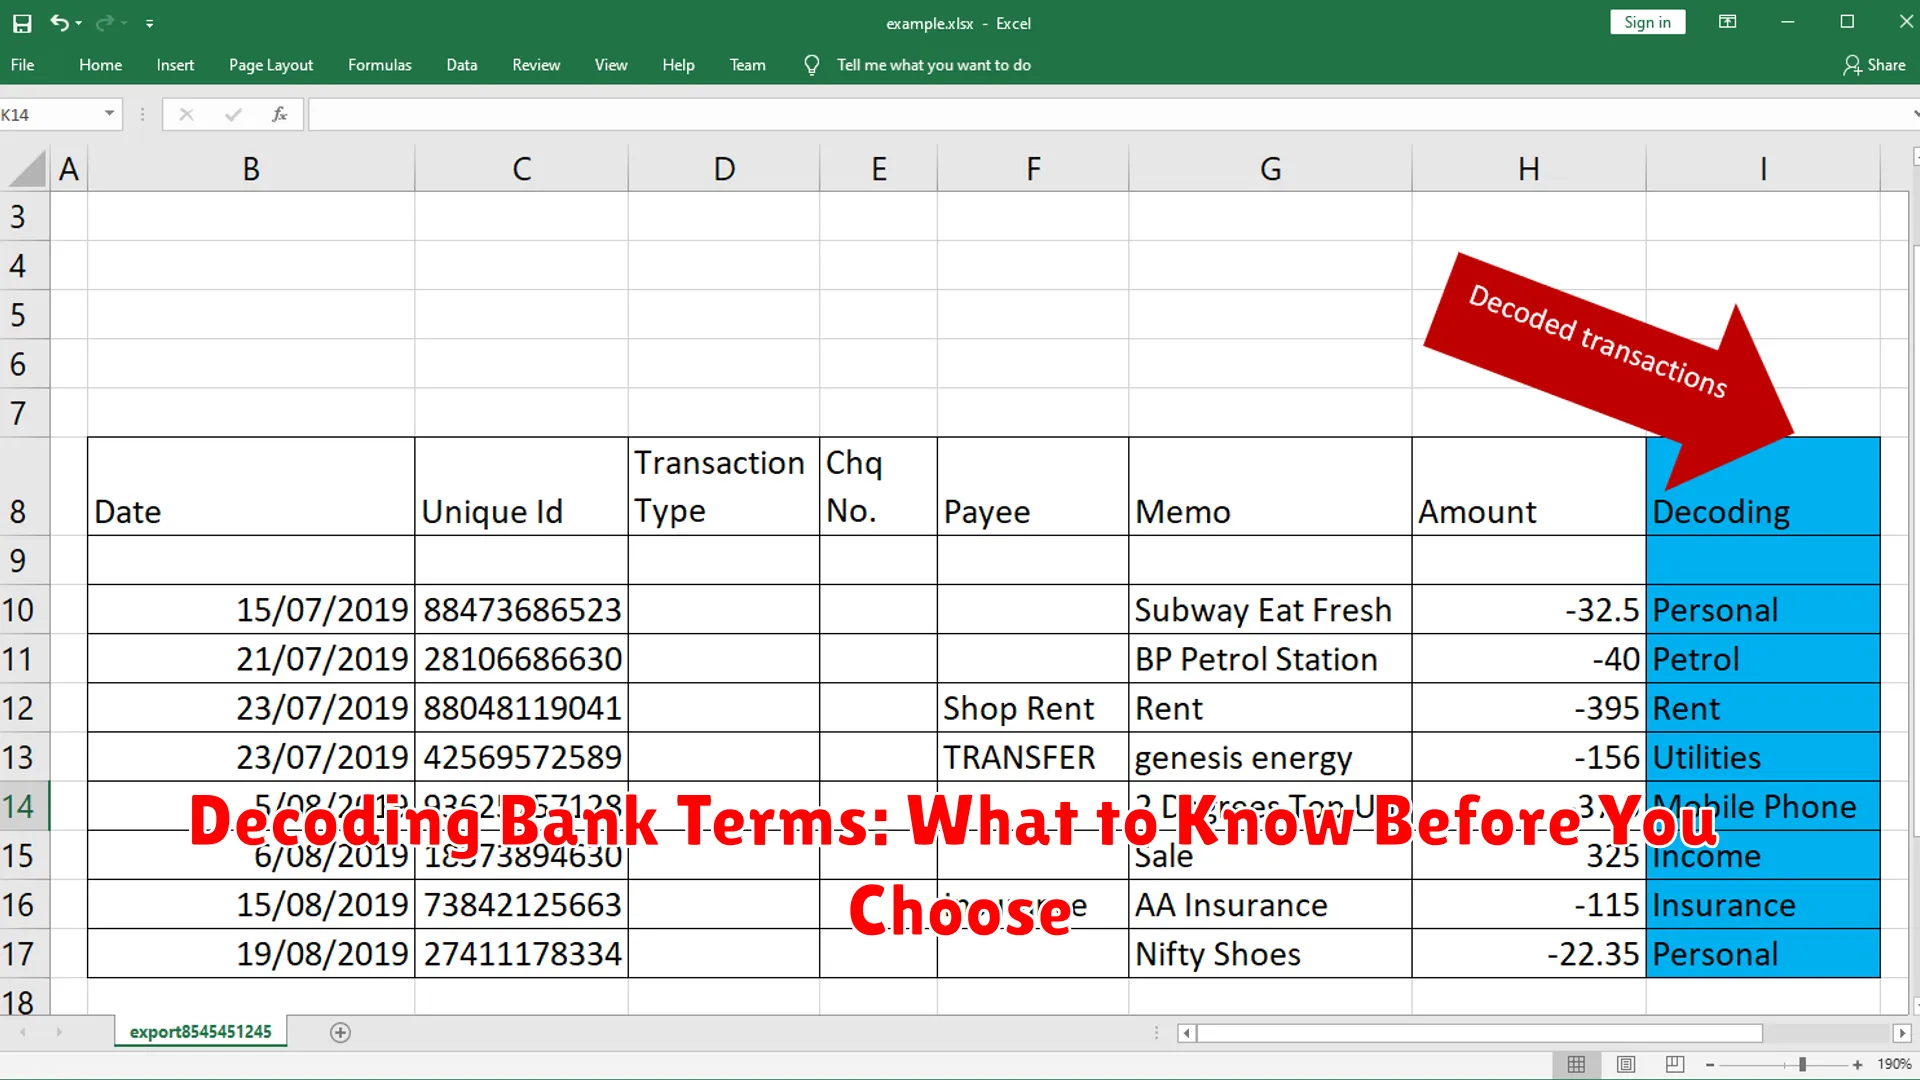 Decoding Bank Terms: What to Know Before You Choose